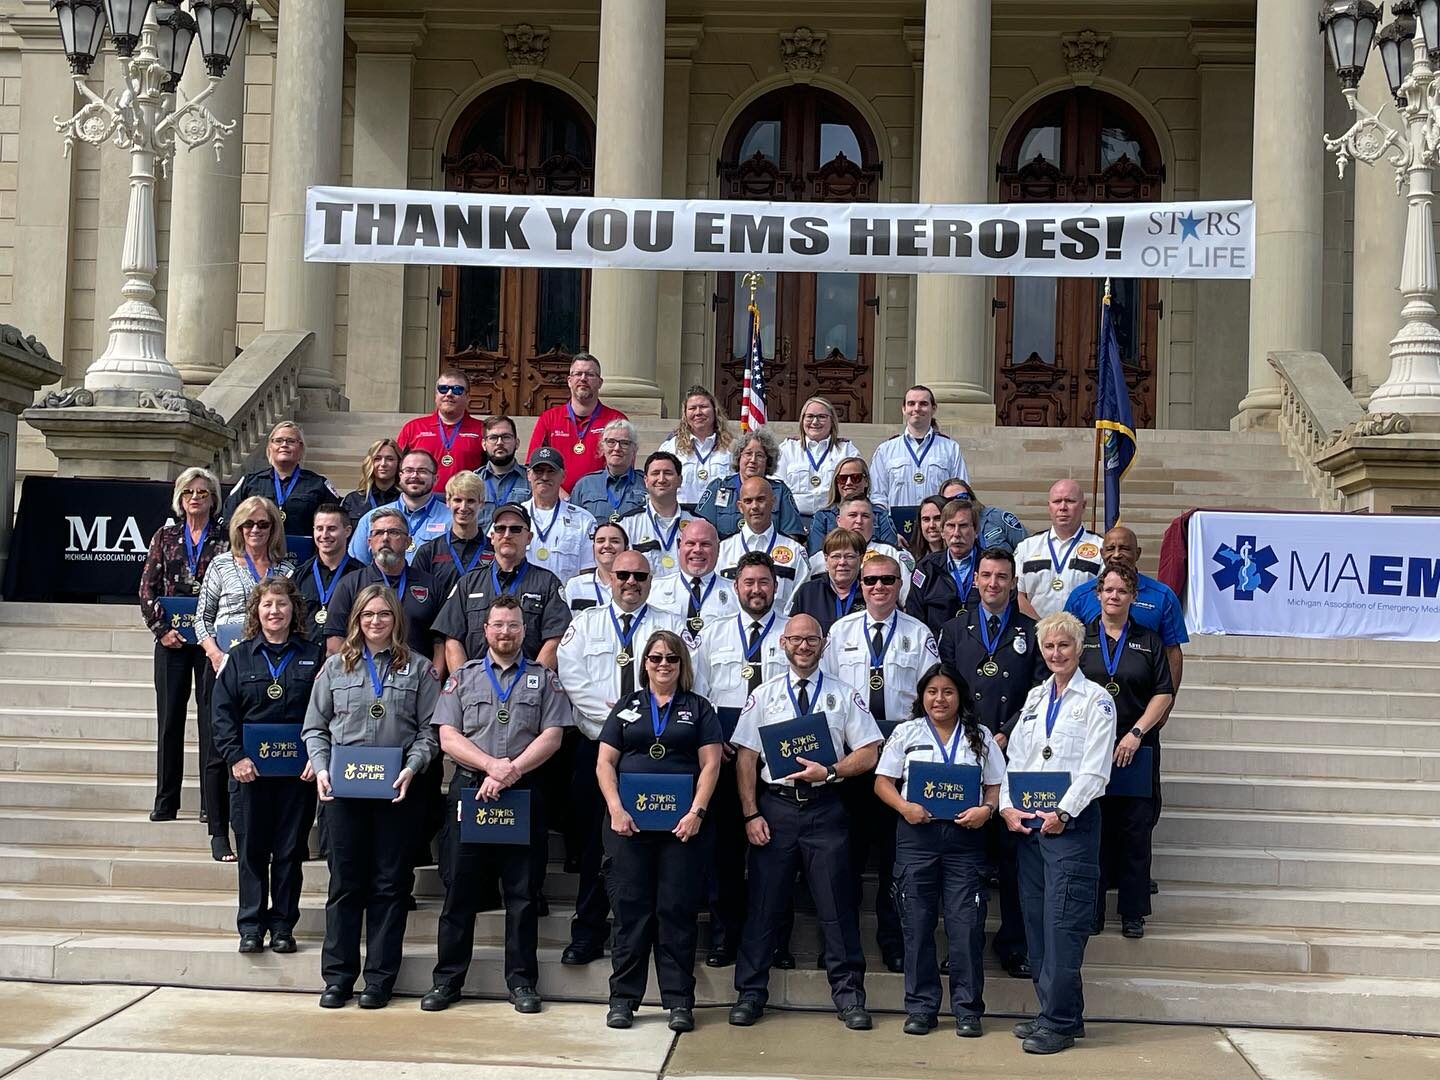 Group of Superior Ambulance of Michigan employees receive Stars of Life Award.